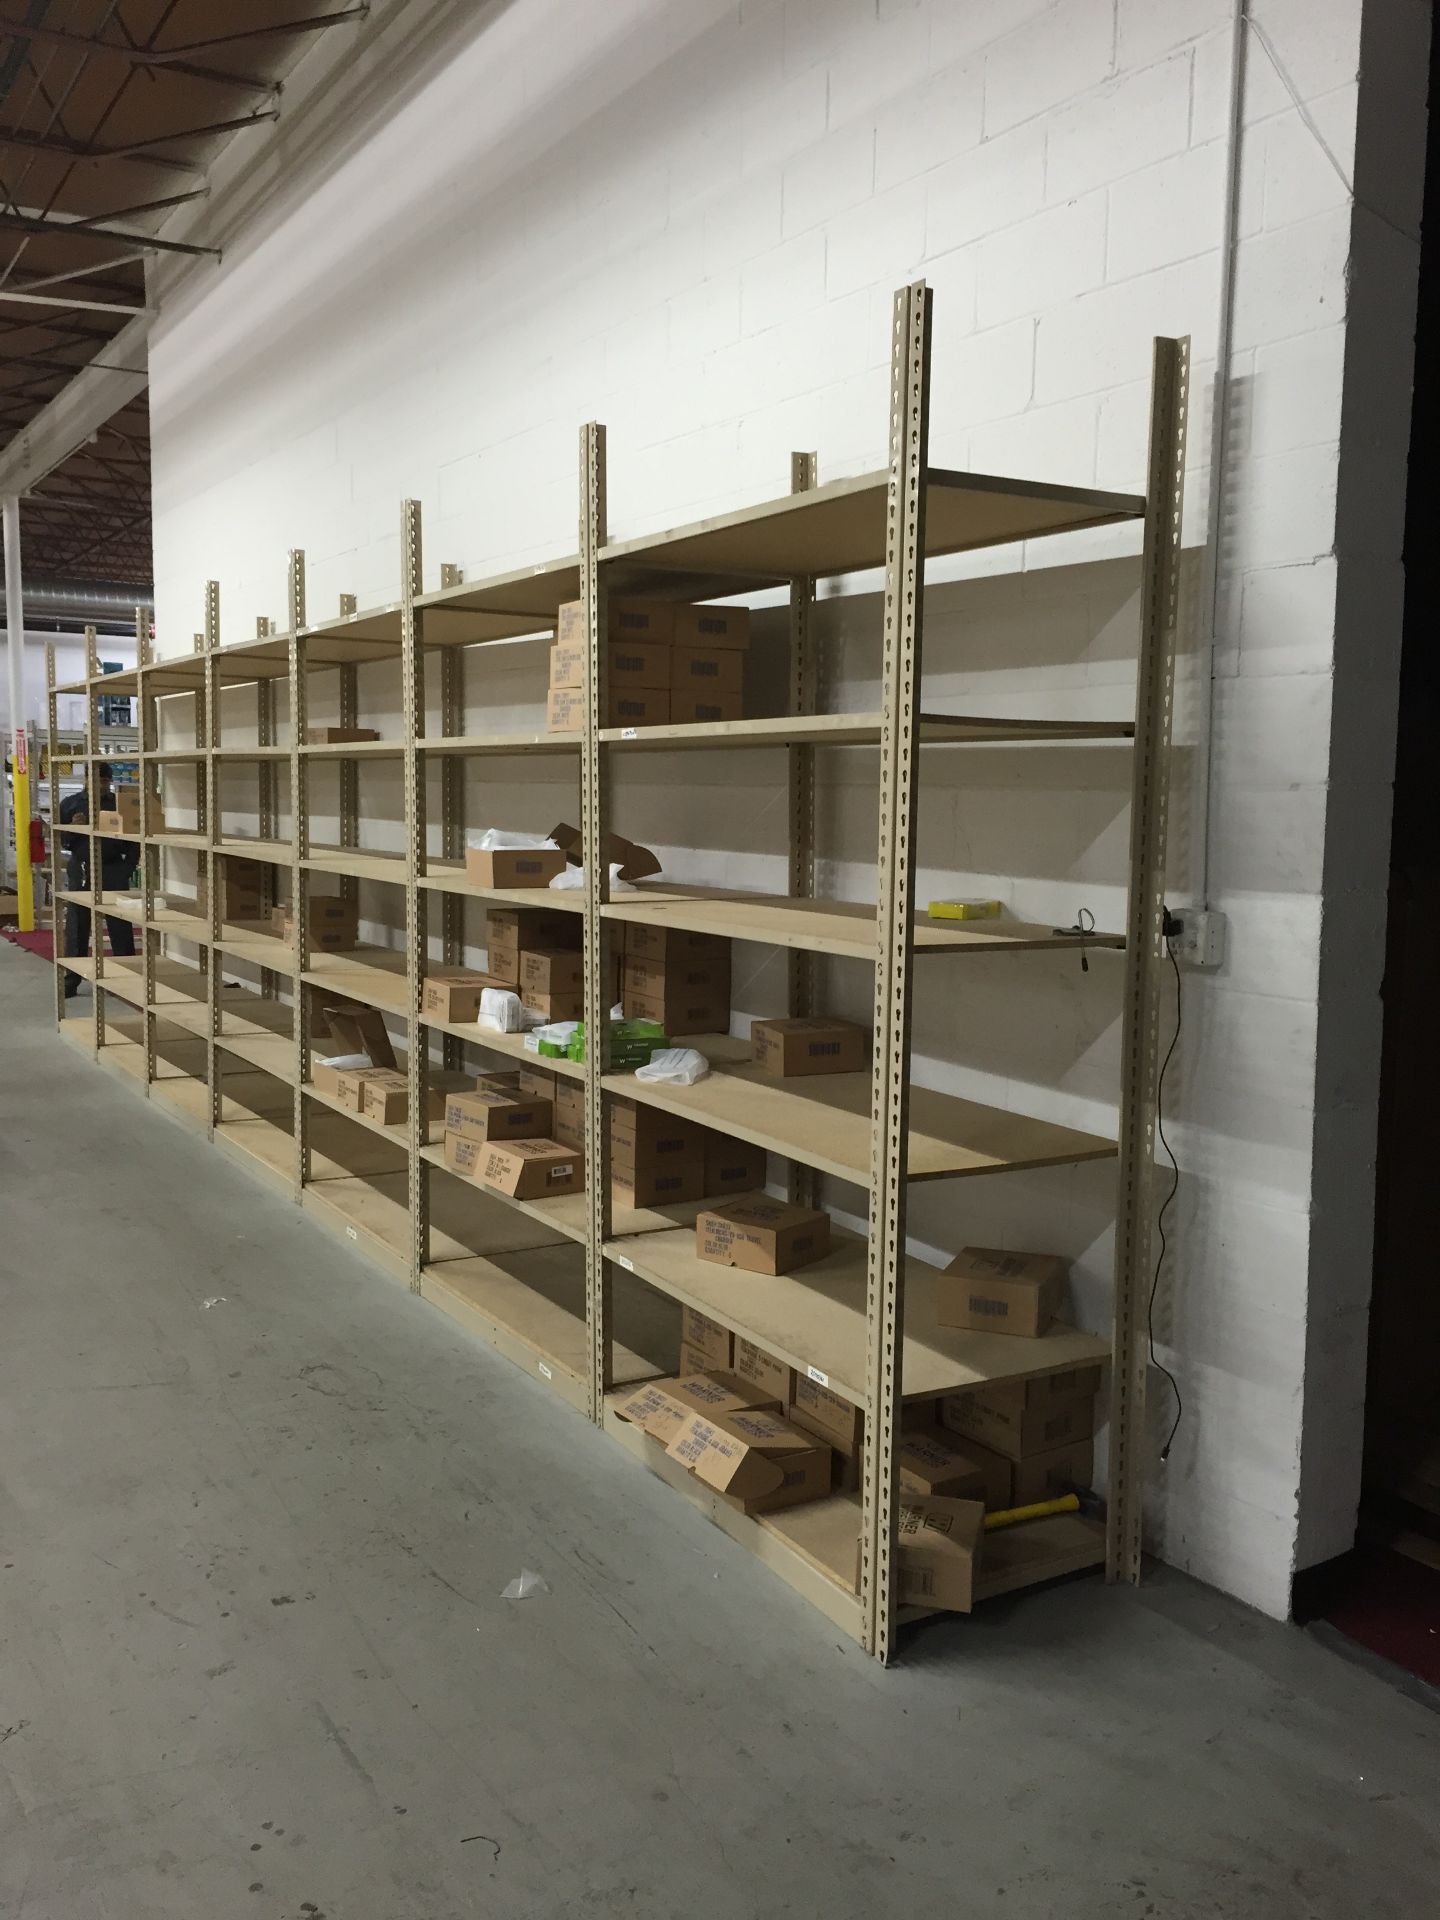 10 SECTIONS OF RIVETIER INDUSTRIAL SHELVING,  EACH SIZE 28"D X 65"W X 84"H, COLOR: MANILA, 5 SHELVES - Image 2 of 2